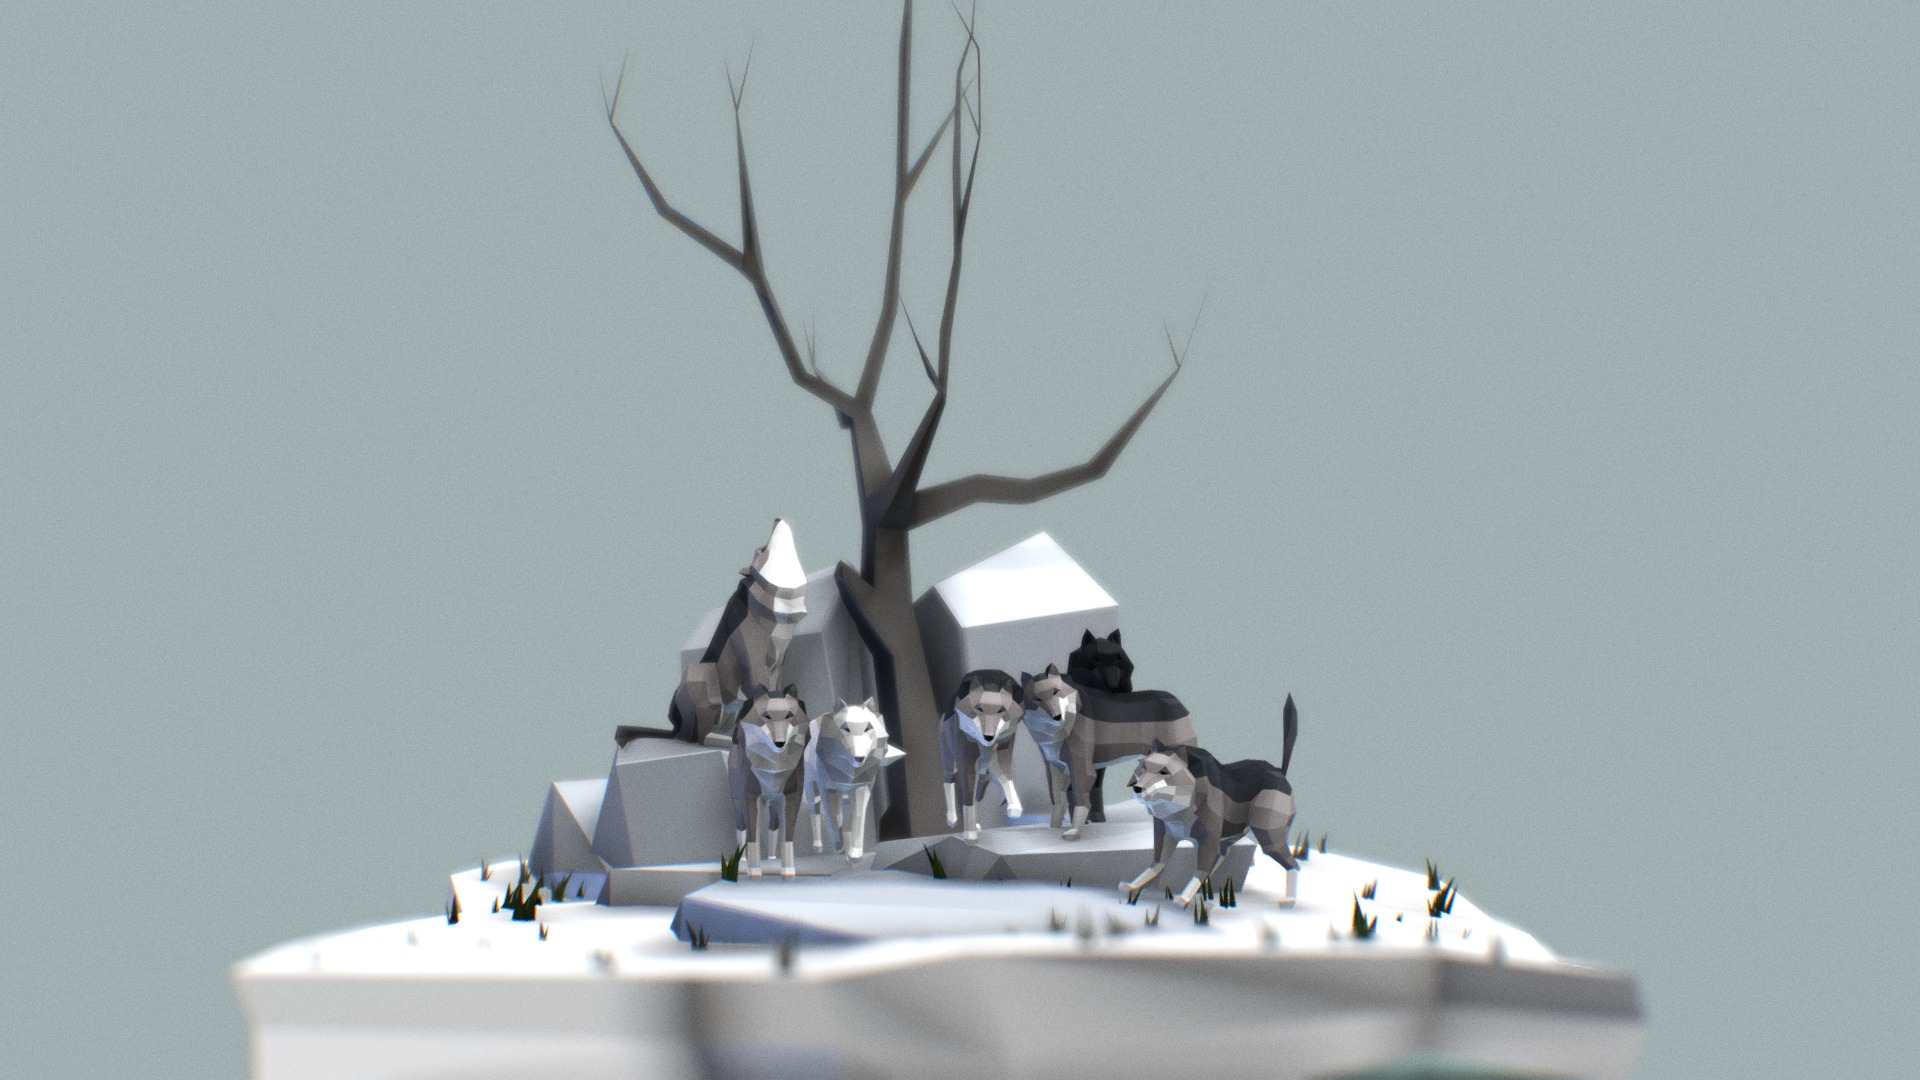 3D model Wolves - This is a 3D model of the Wolves. The 3D model is about a group of penguins on a white platform with a tree in the background.